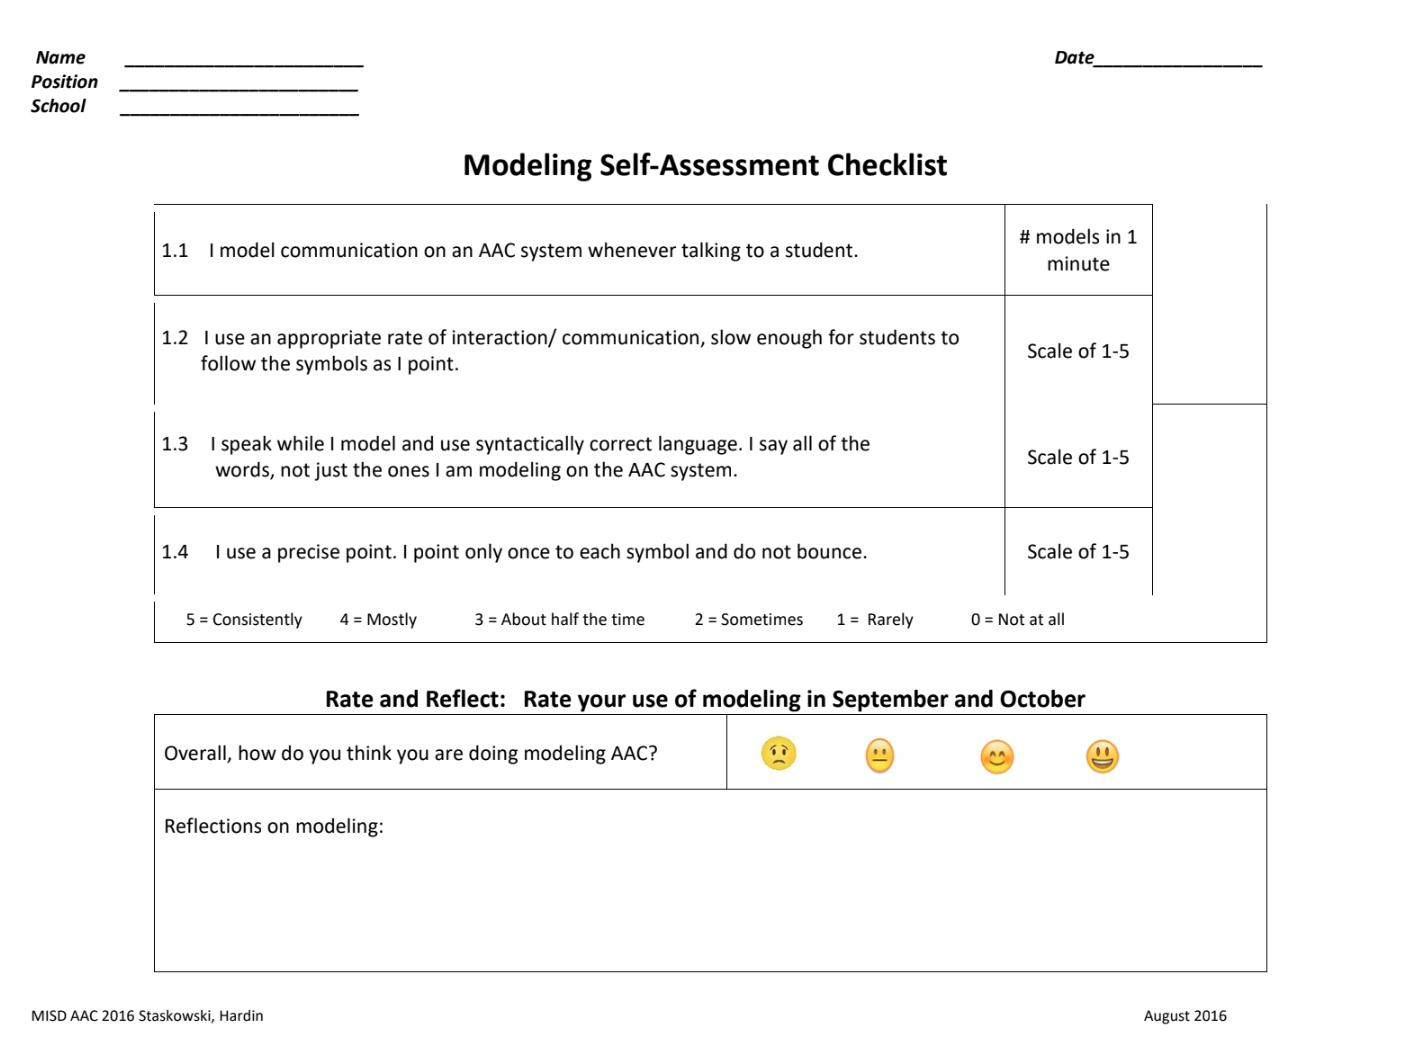 Reflection tool with best practices for modeling AAC and I can statements for the user to reflect on current practice.